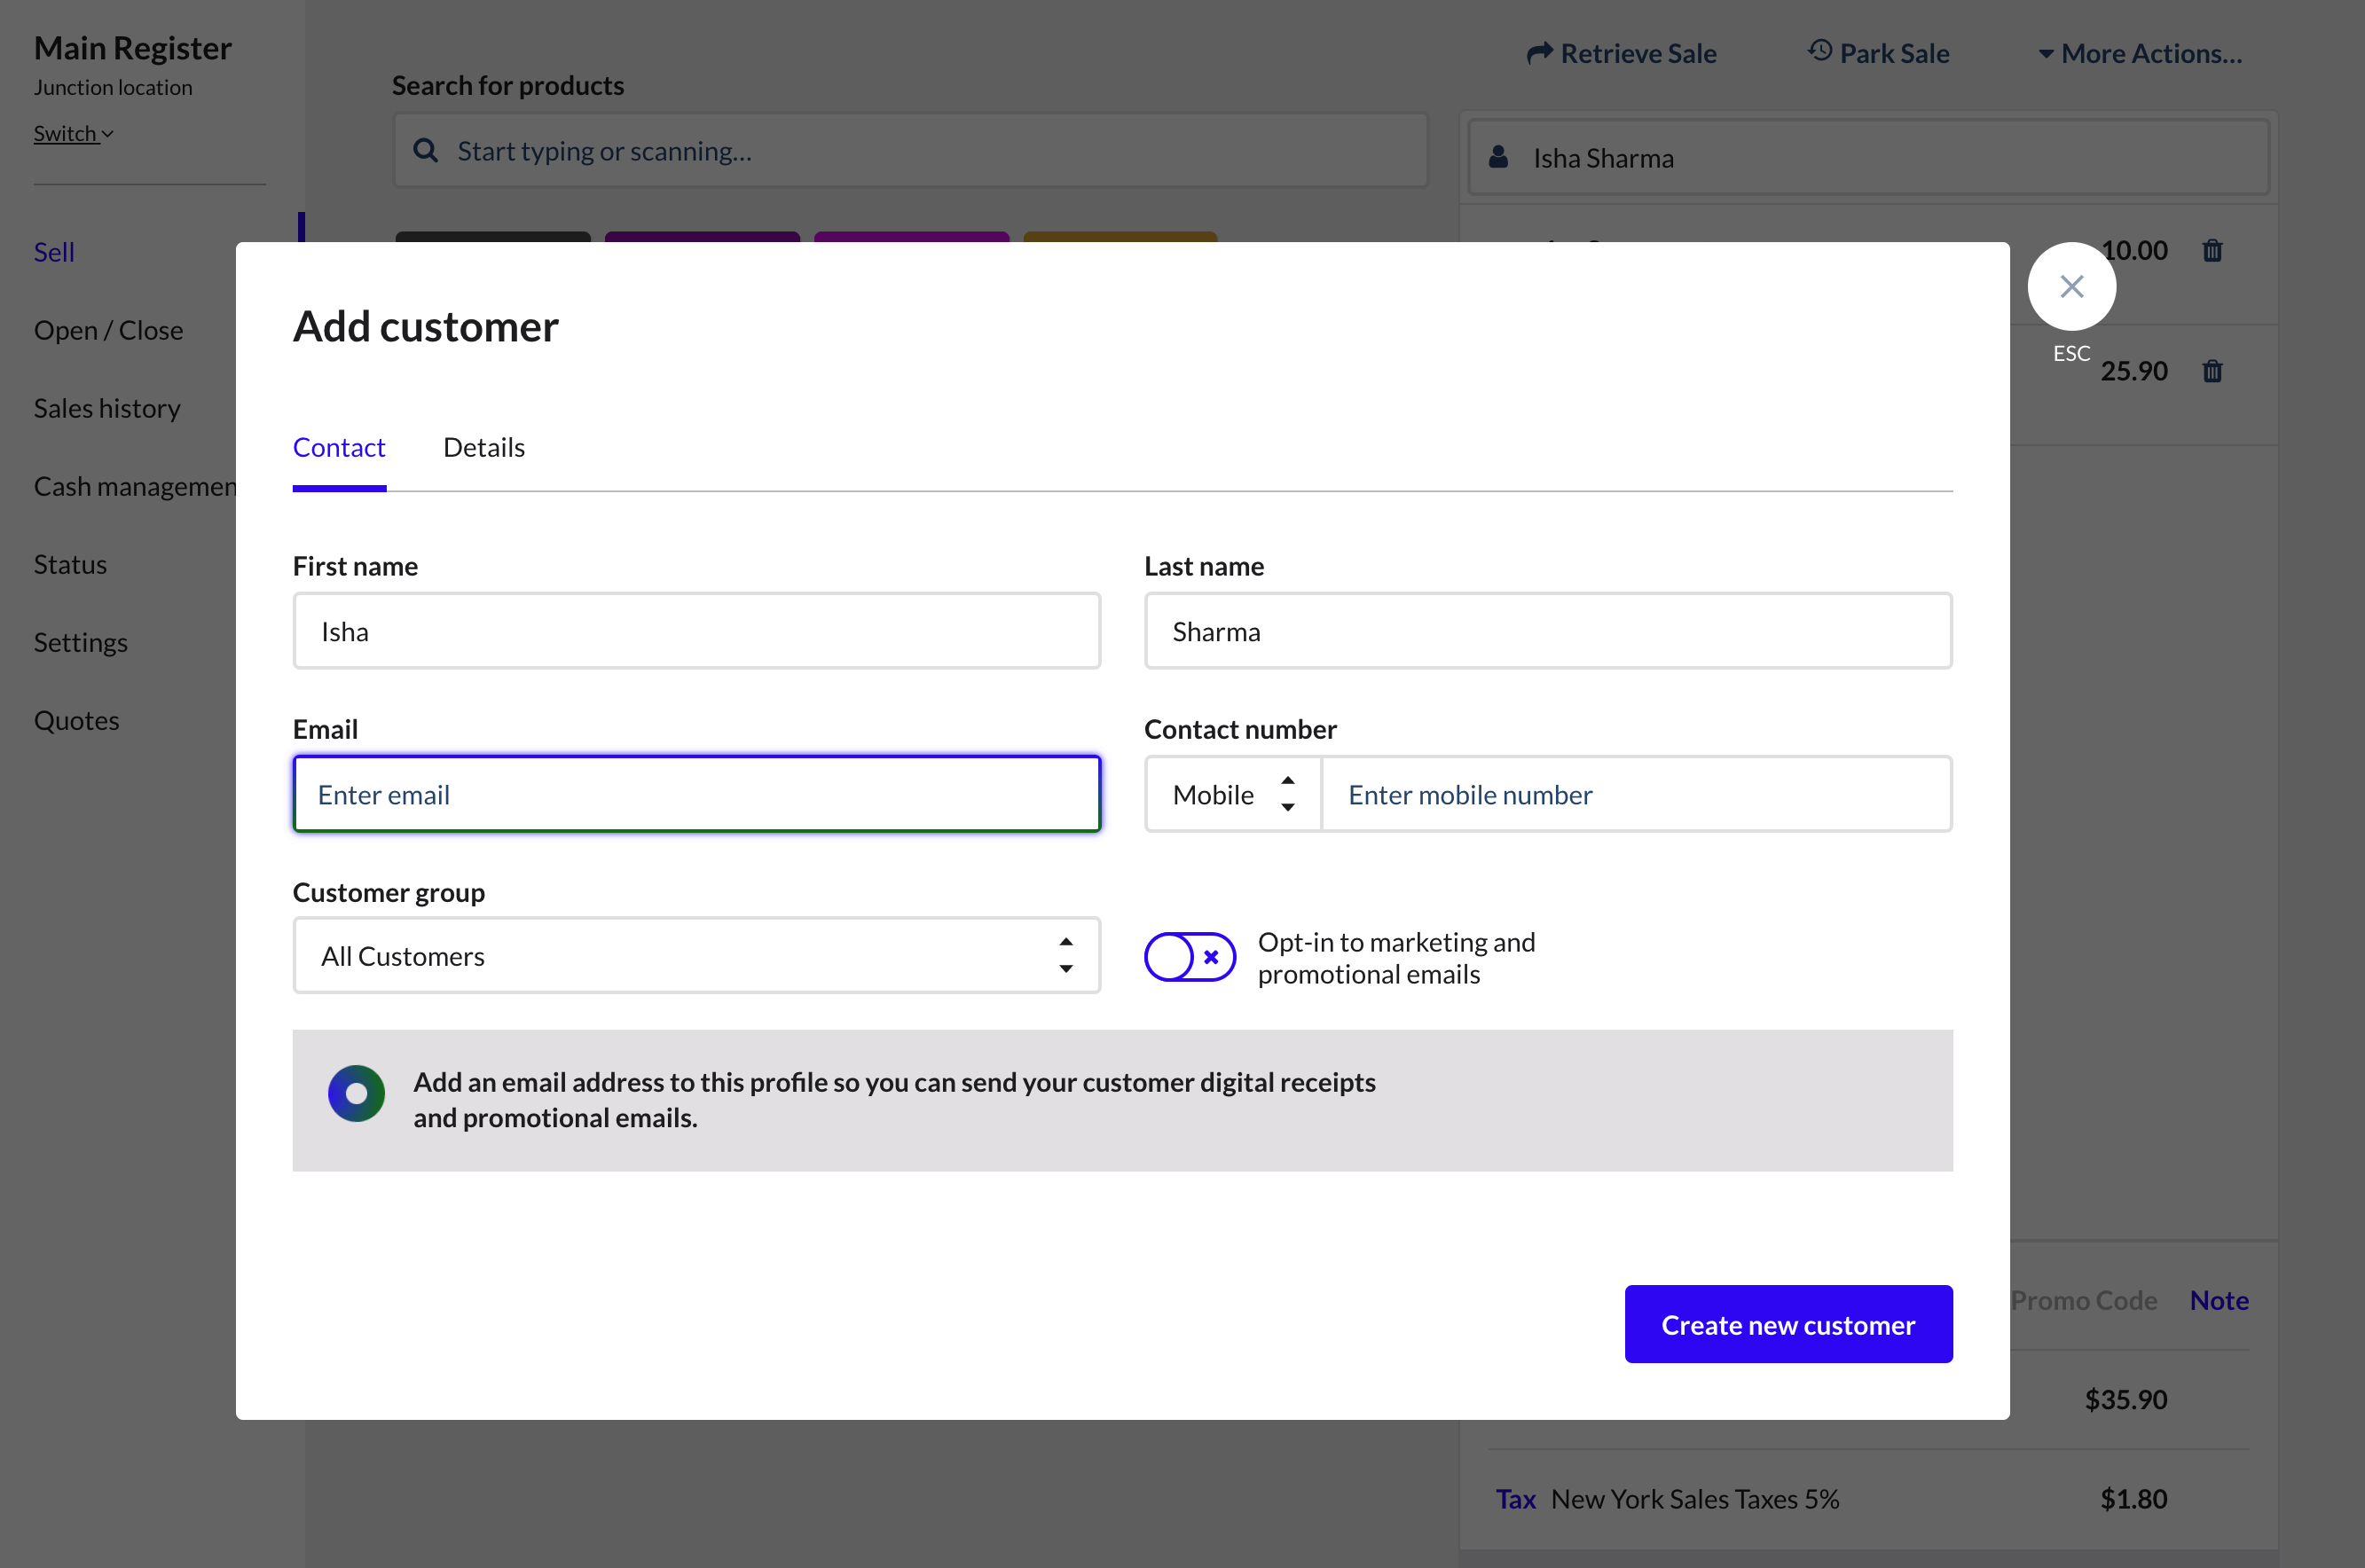 Add new customer dialogue box with fields for entering customer information.